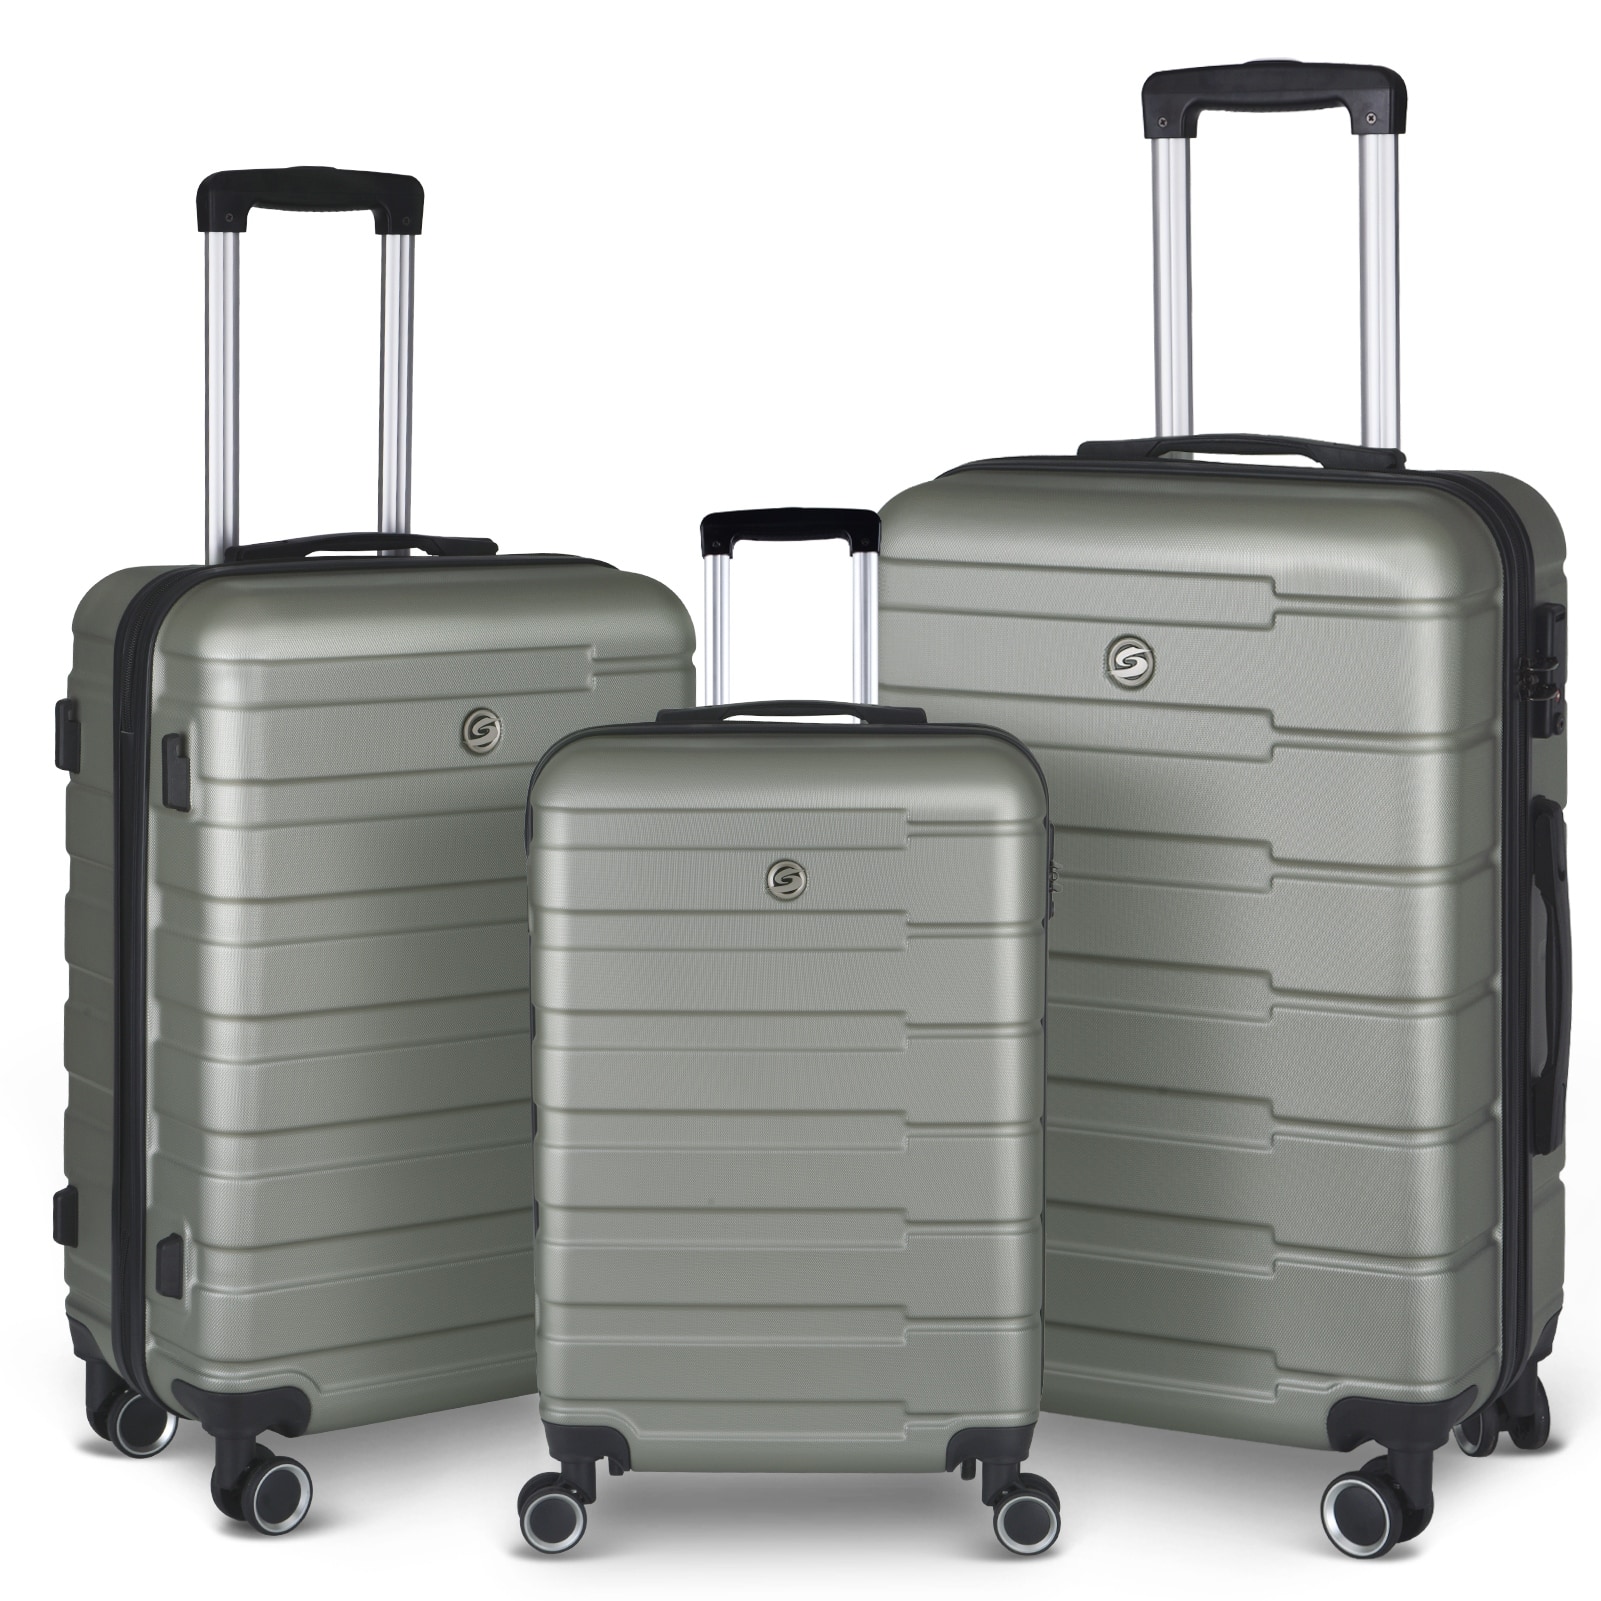 3-Piece Luggage Set Hardside Carry-on Suitcase with Spinner Wheels and ...